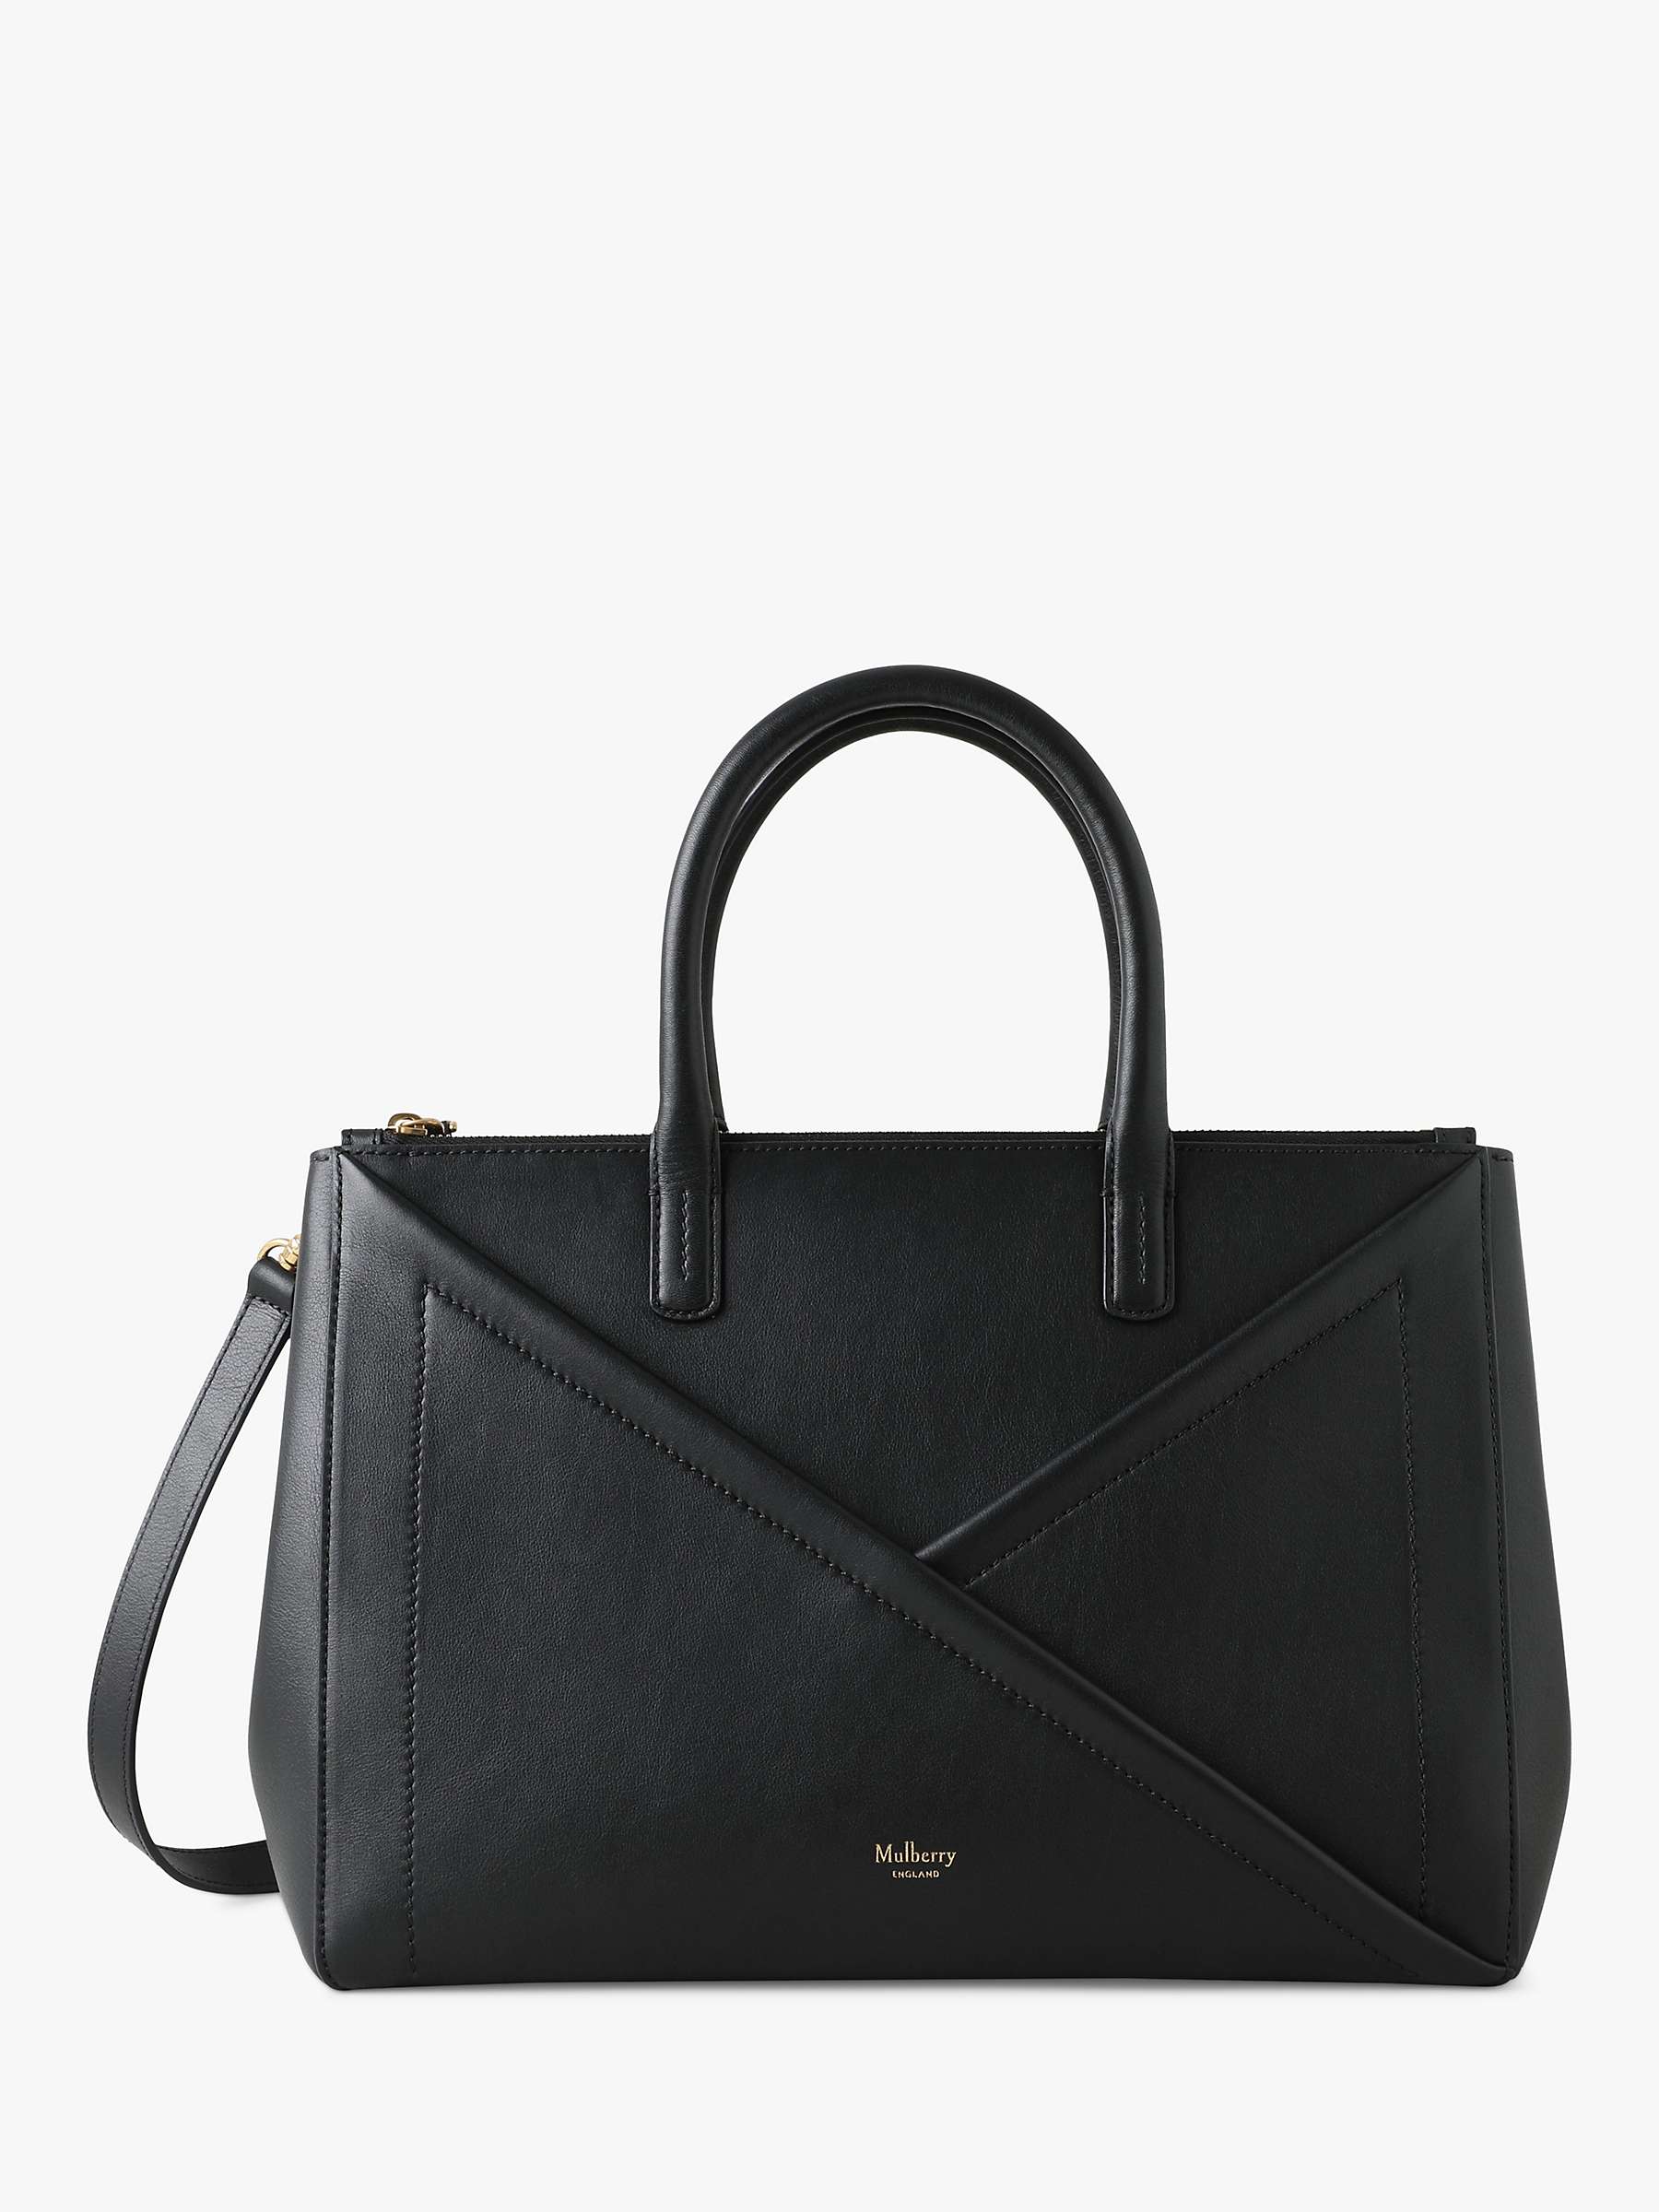 Buy Mulberry M Zipped Micro Classic Grain Leather Top Handle Bag, Black Online at johnlewis.com